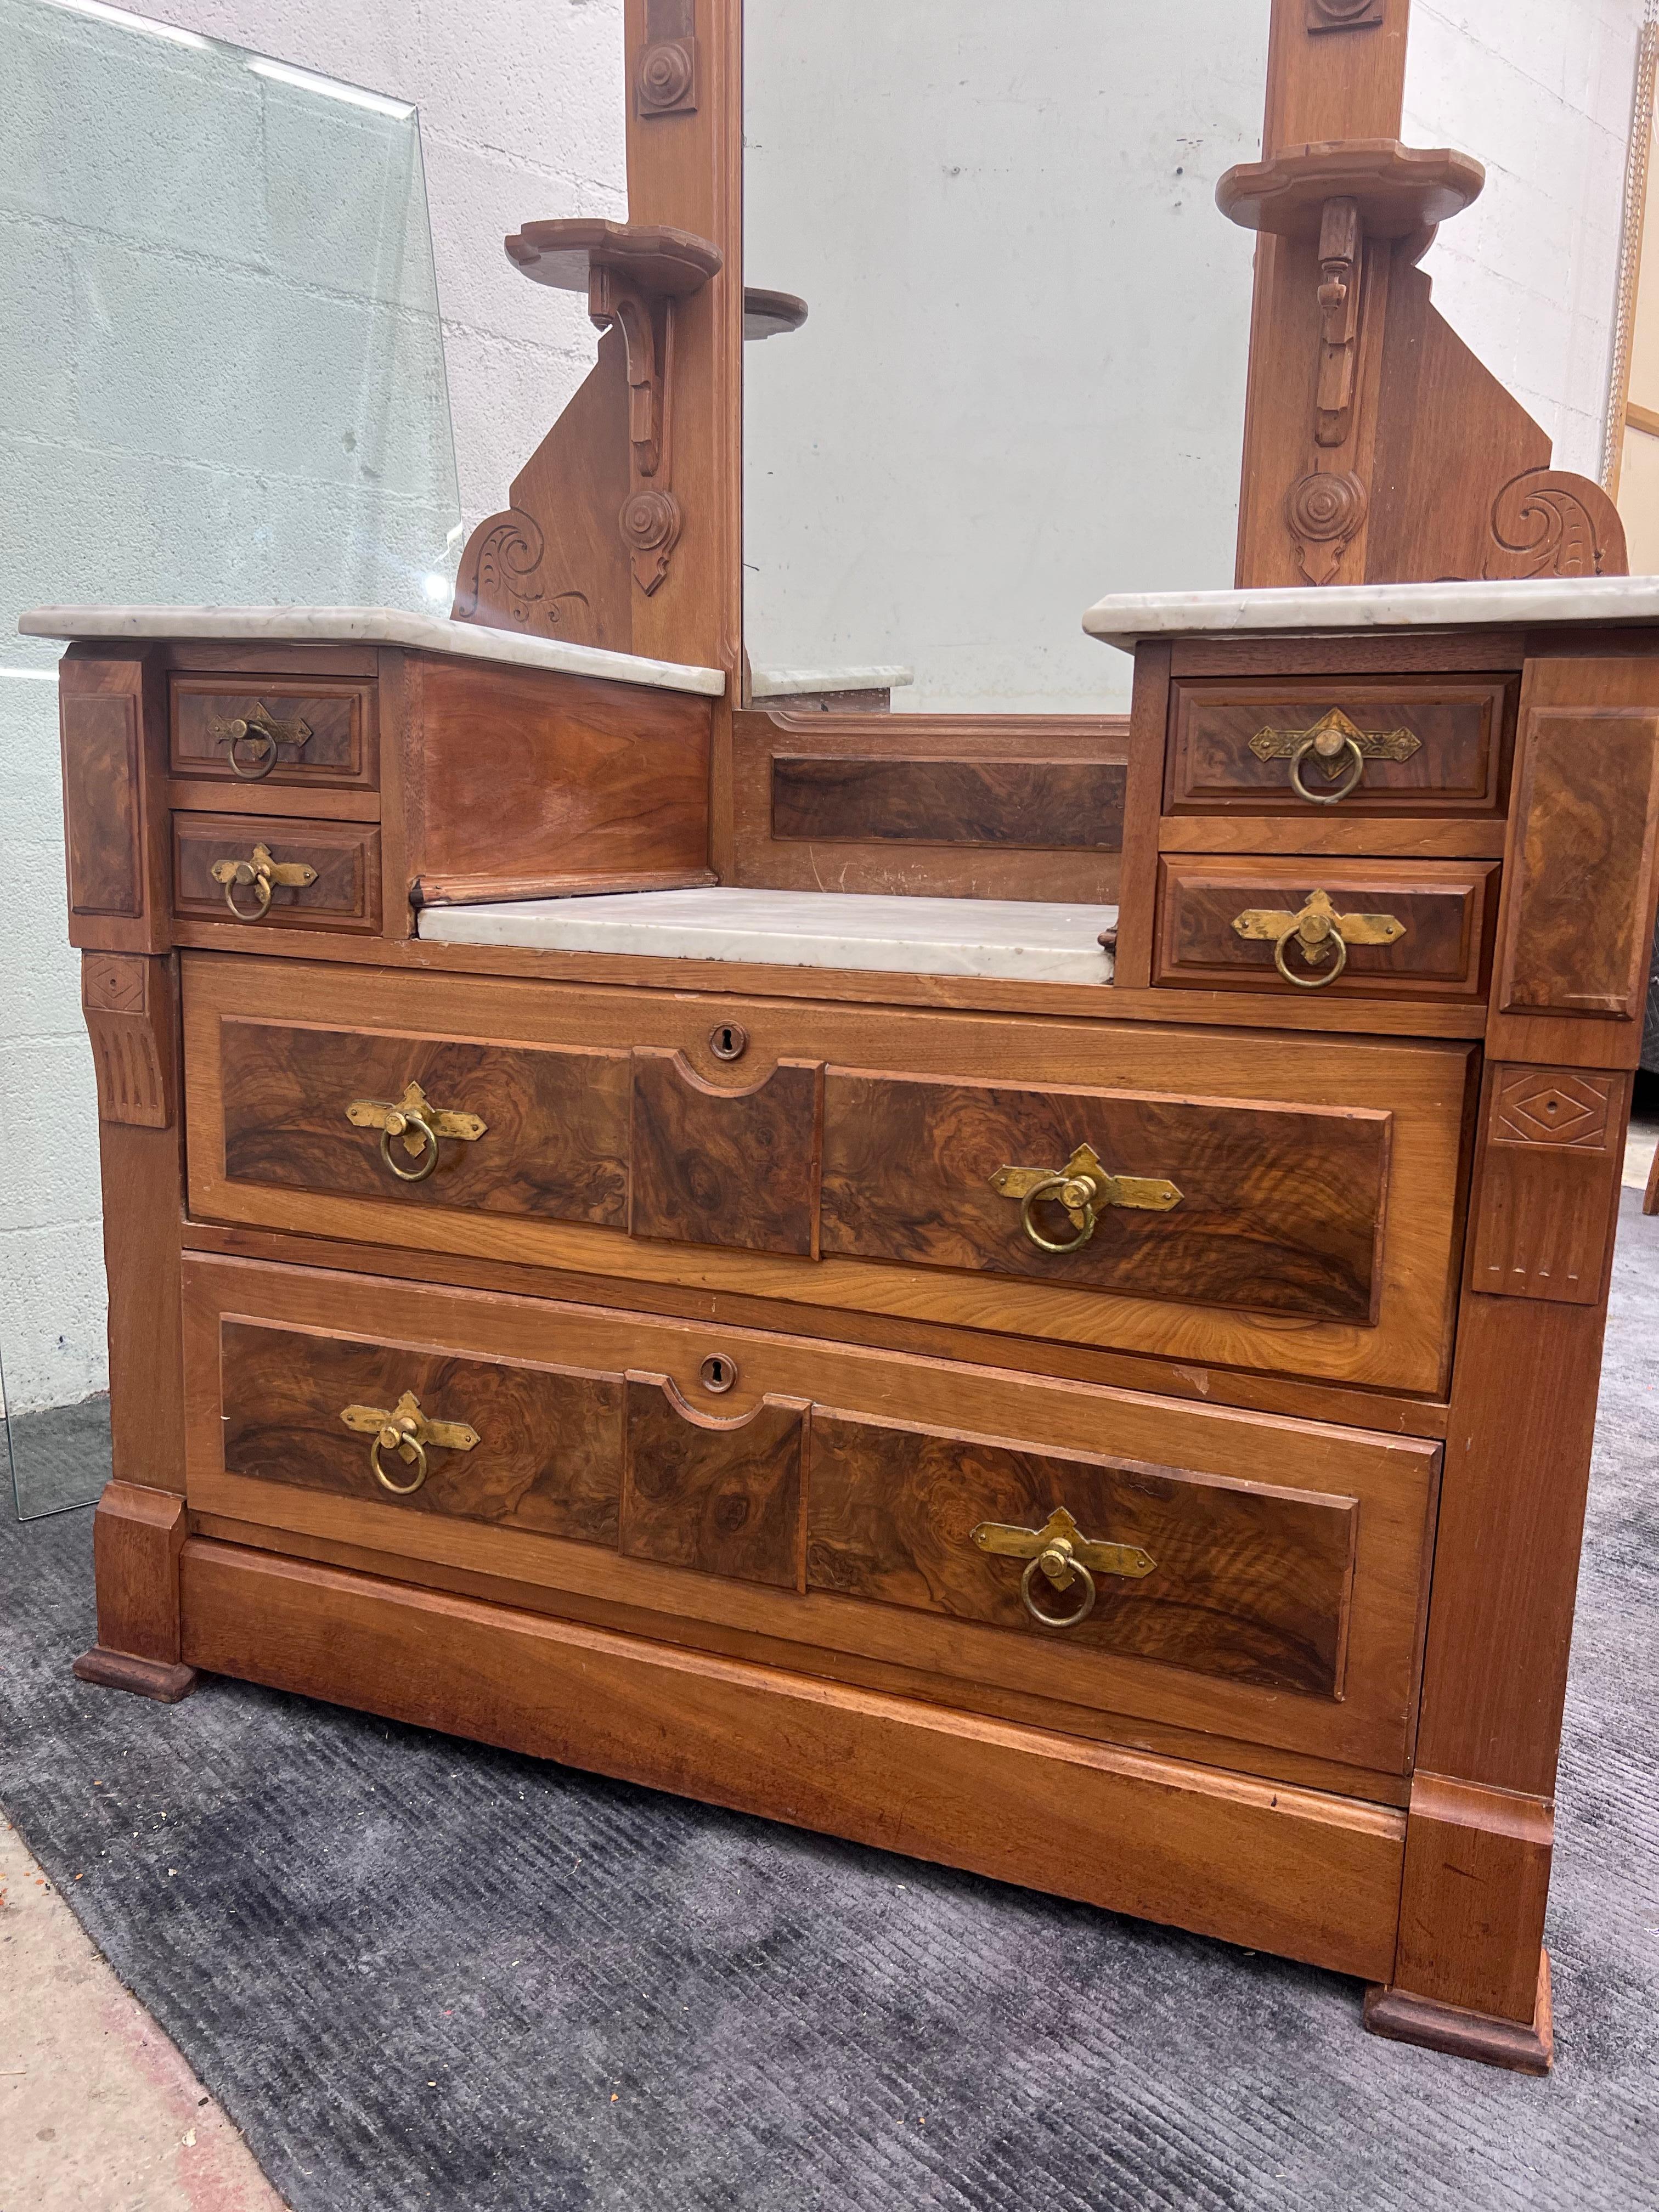 19th century Eastlake two tiered marble dresser with tall Mirror. Constructed out of solid walnut with burled drawer fronts and hand carved details throughout. 
The dresser has solid brass handles and dovetailed joints. The mirror can be